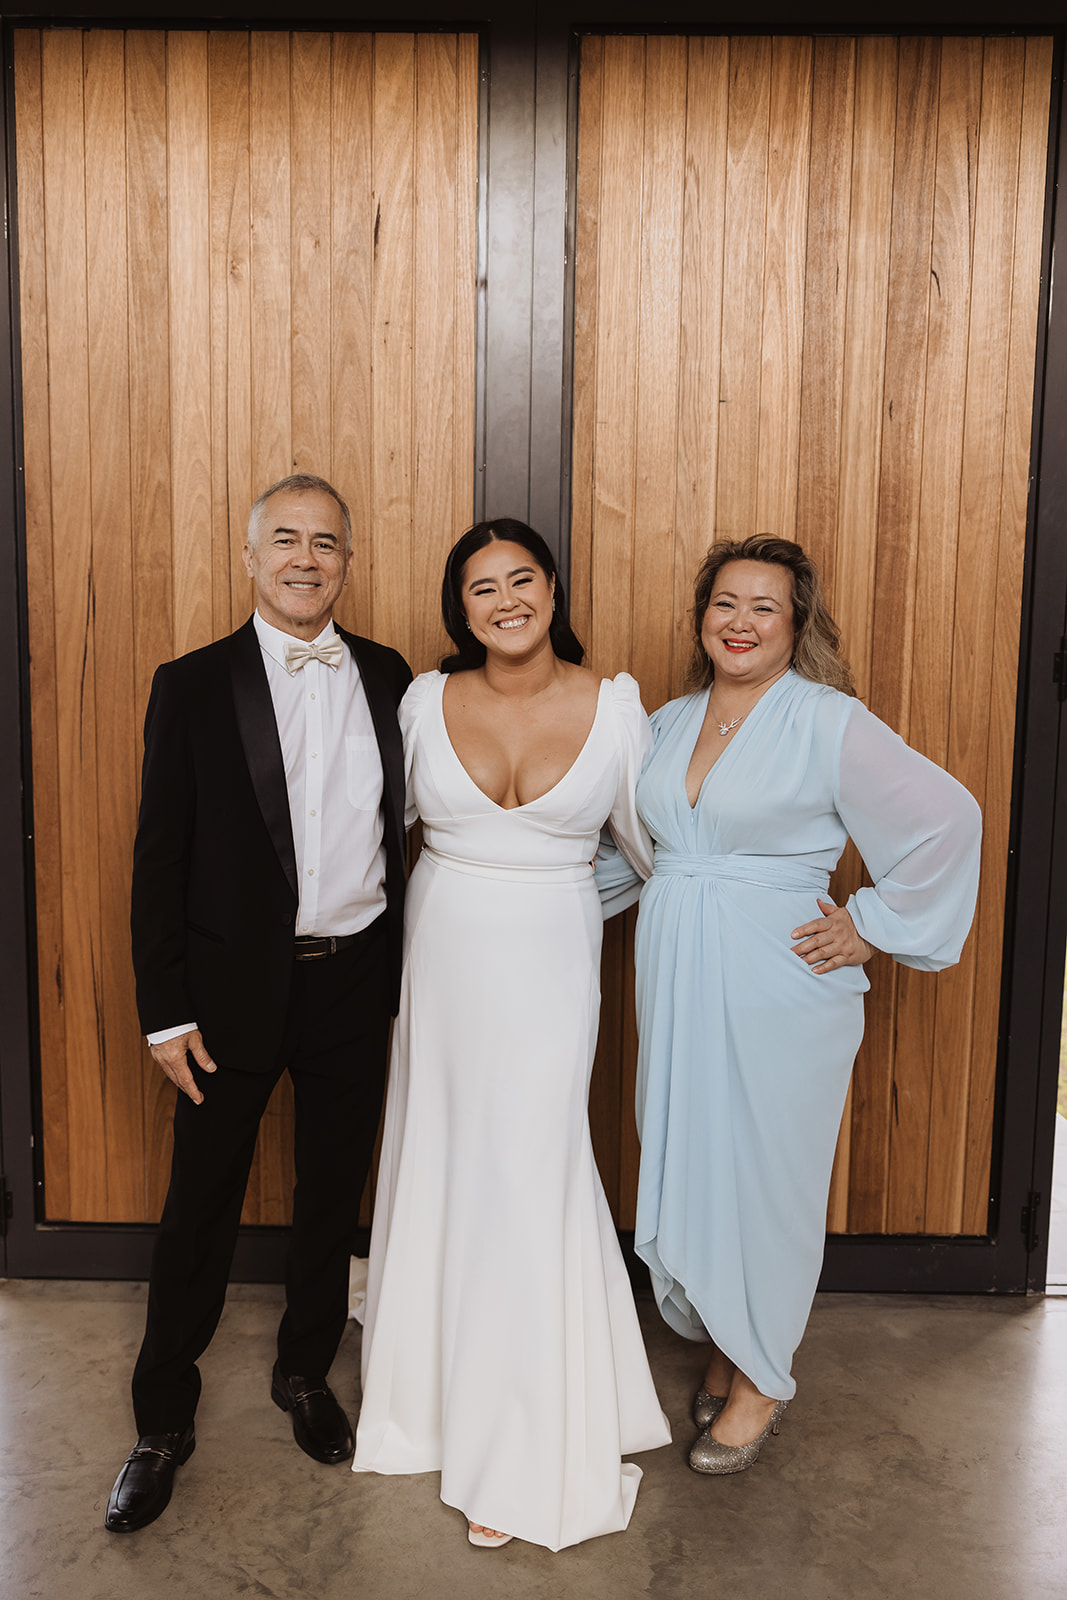 The bride with her family